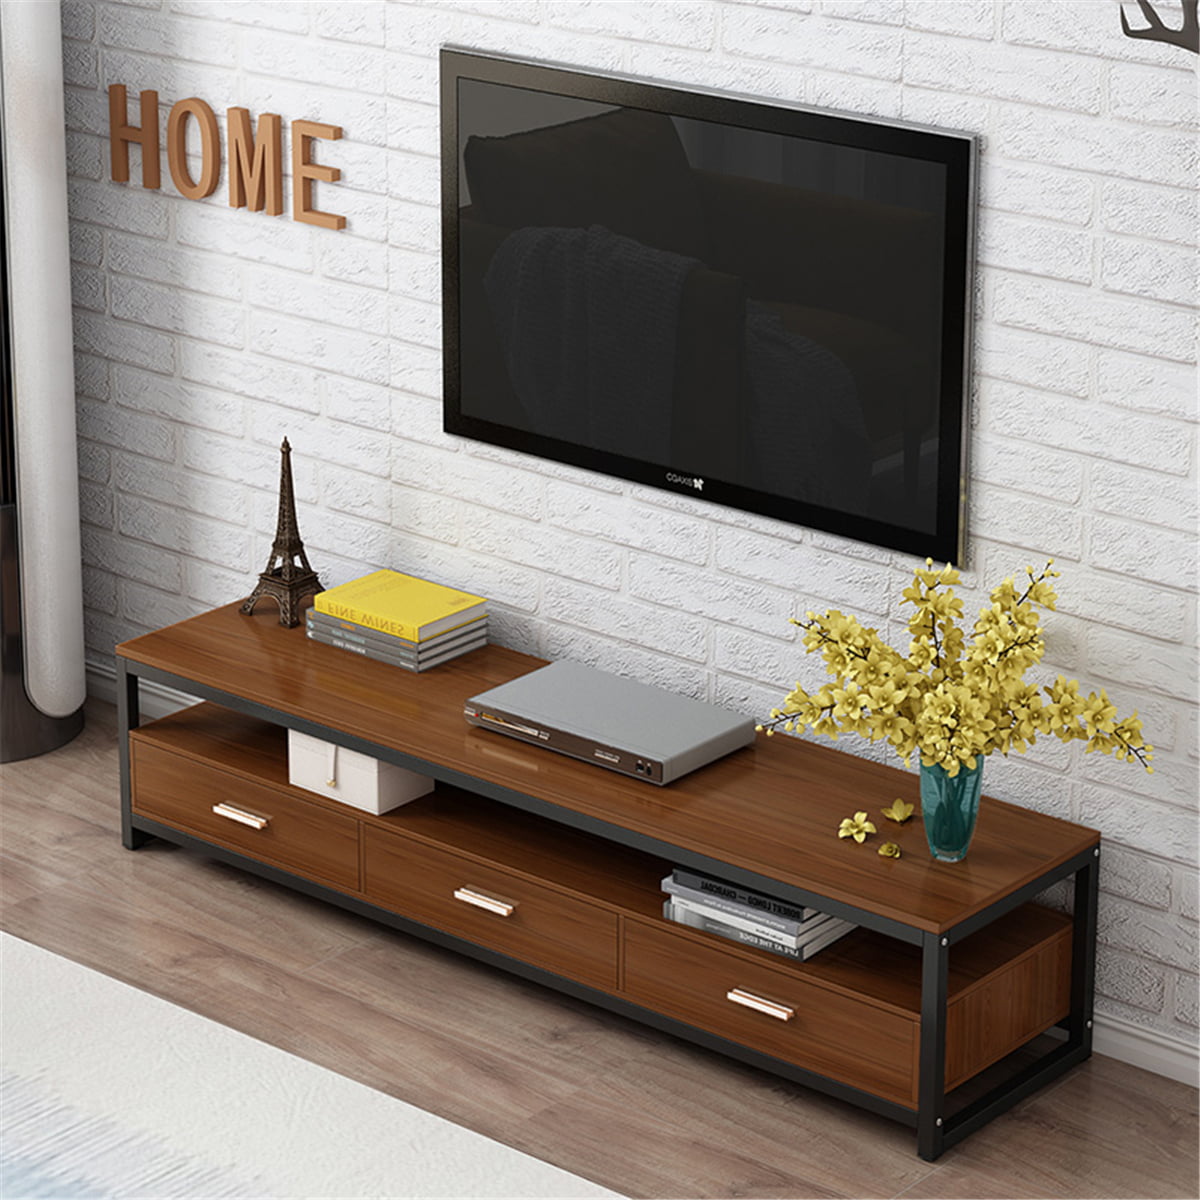 Cubic 47" Modern TV Stand and Media Storage VHD 